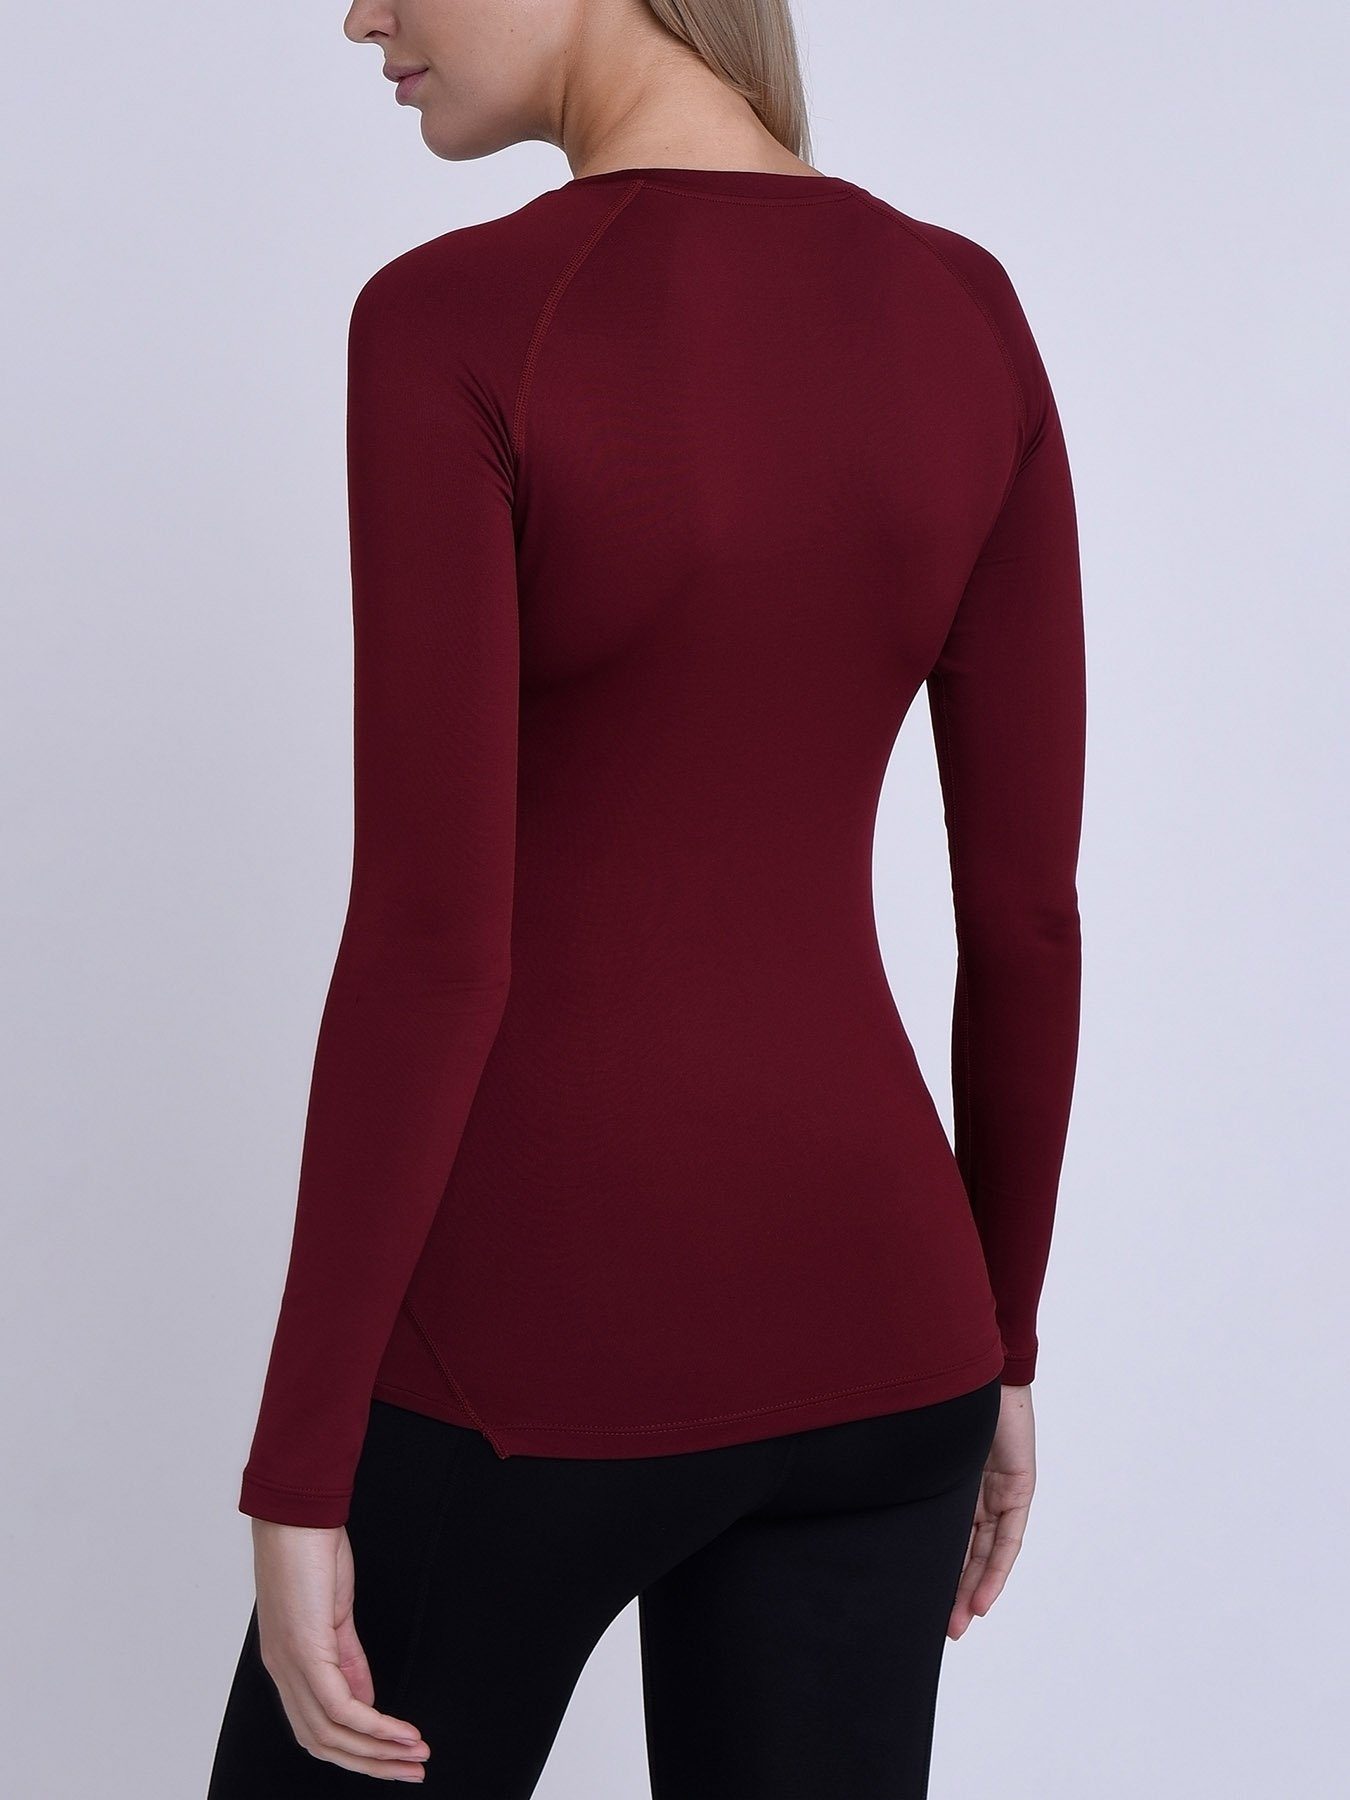 Women's Thermal Long Sleeve Tops - Roots